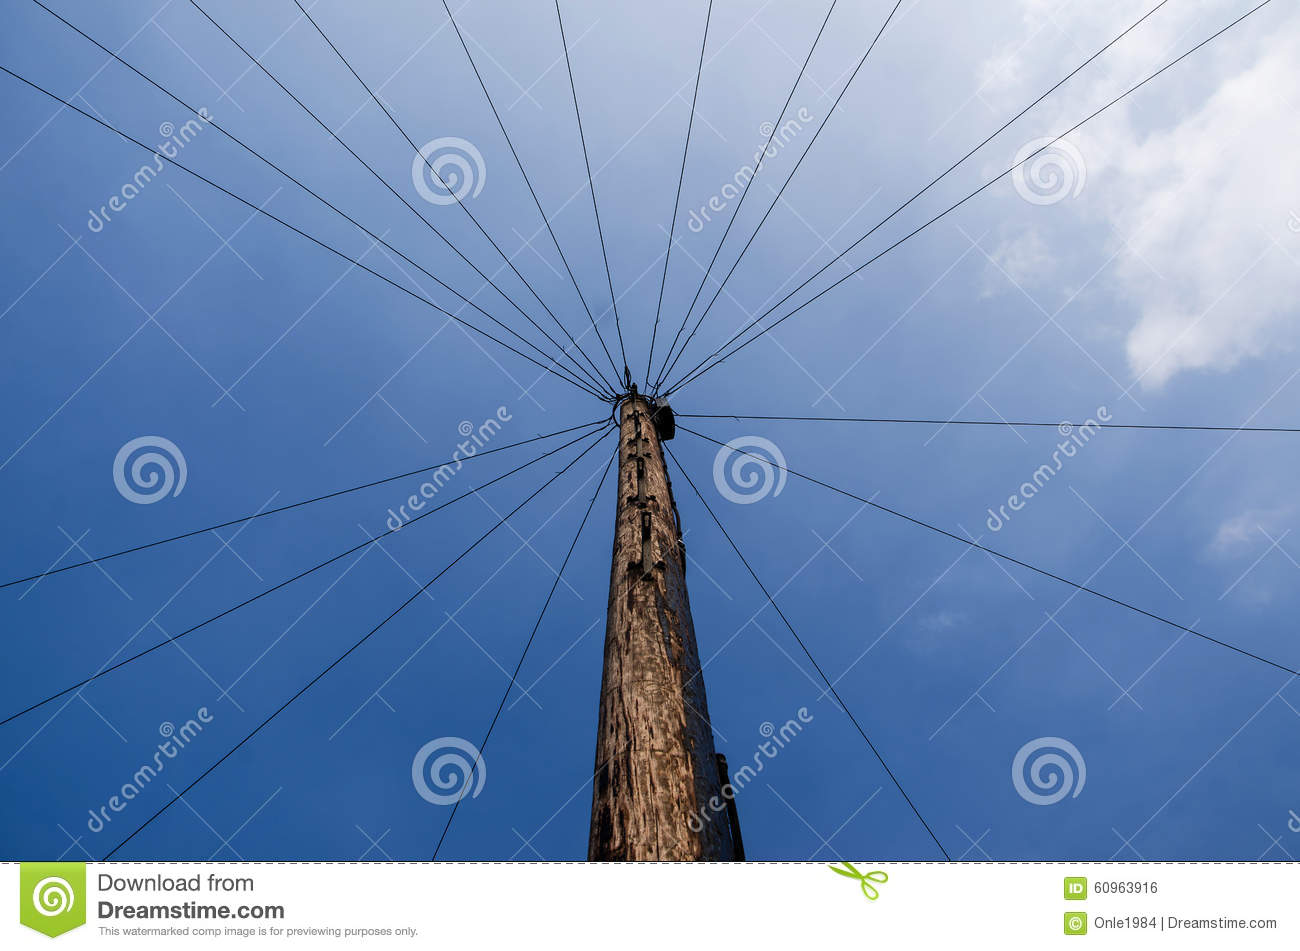 Wood Pole And Wires Stock Photo   Image  60963916